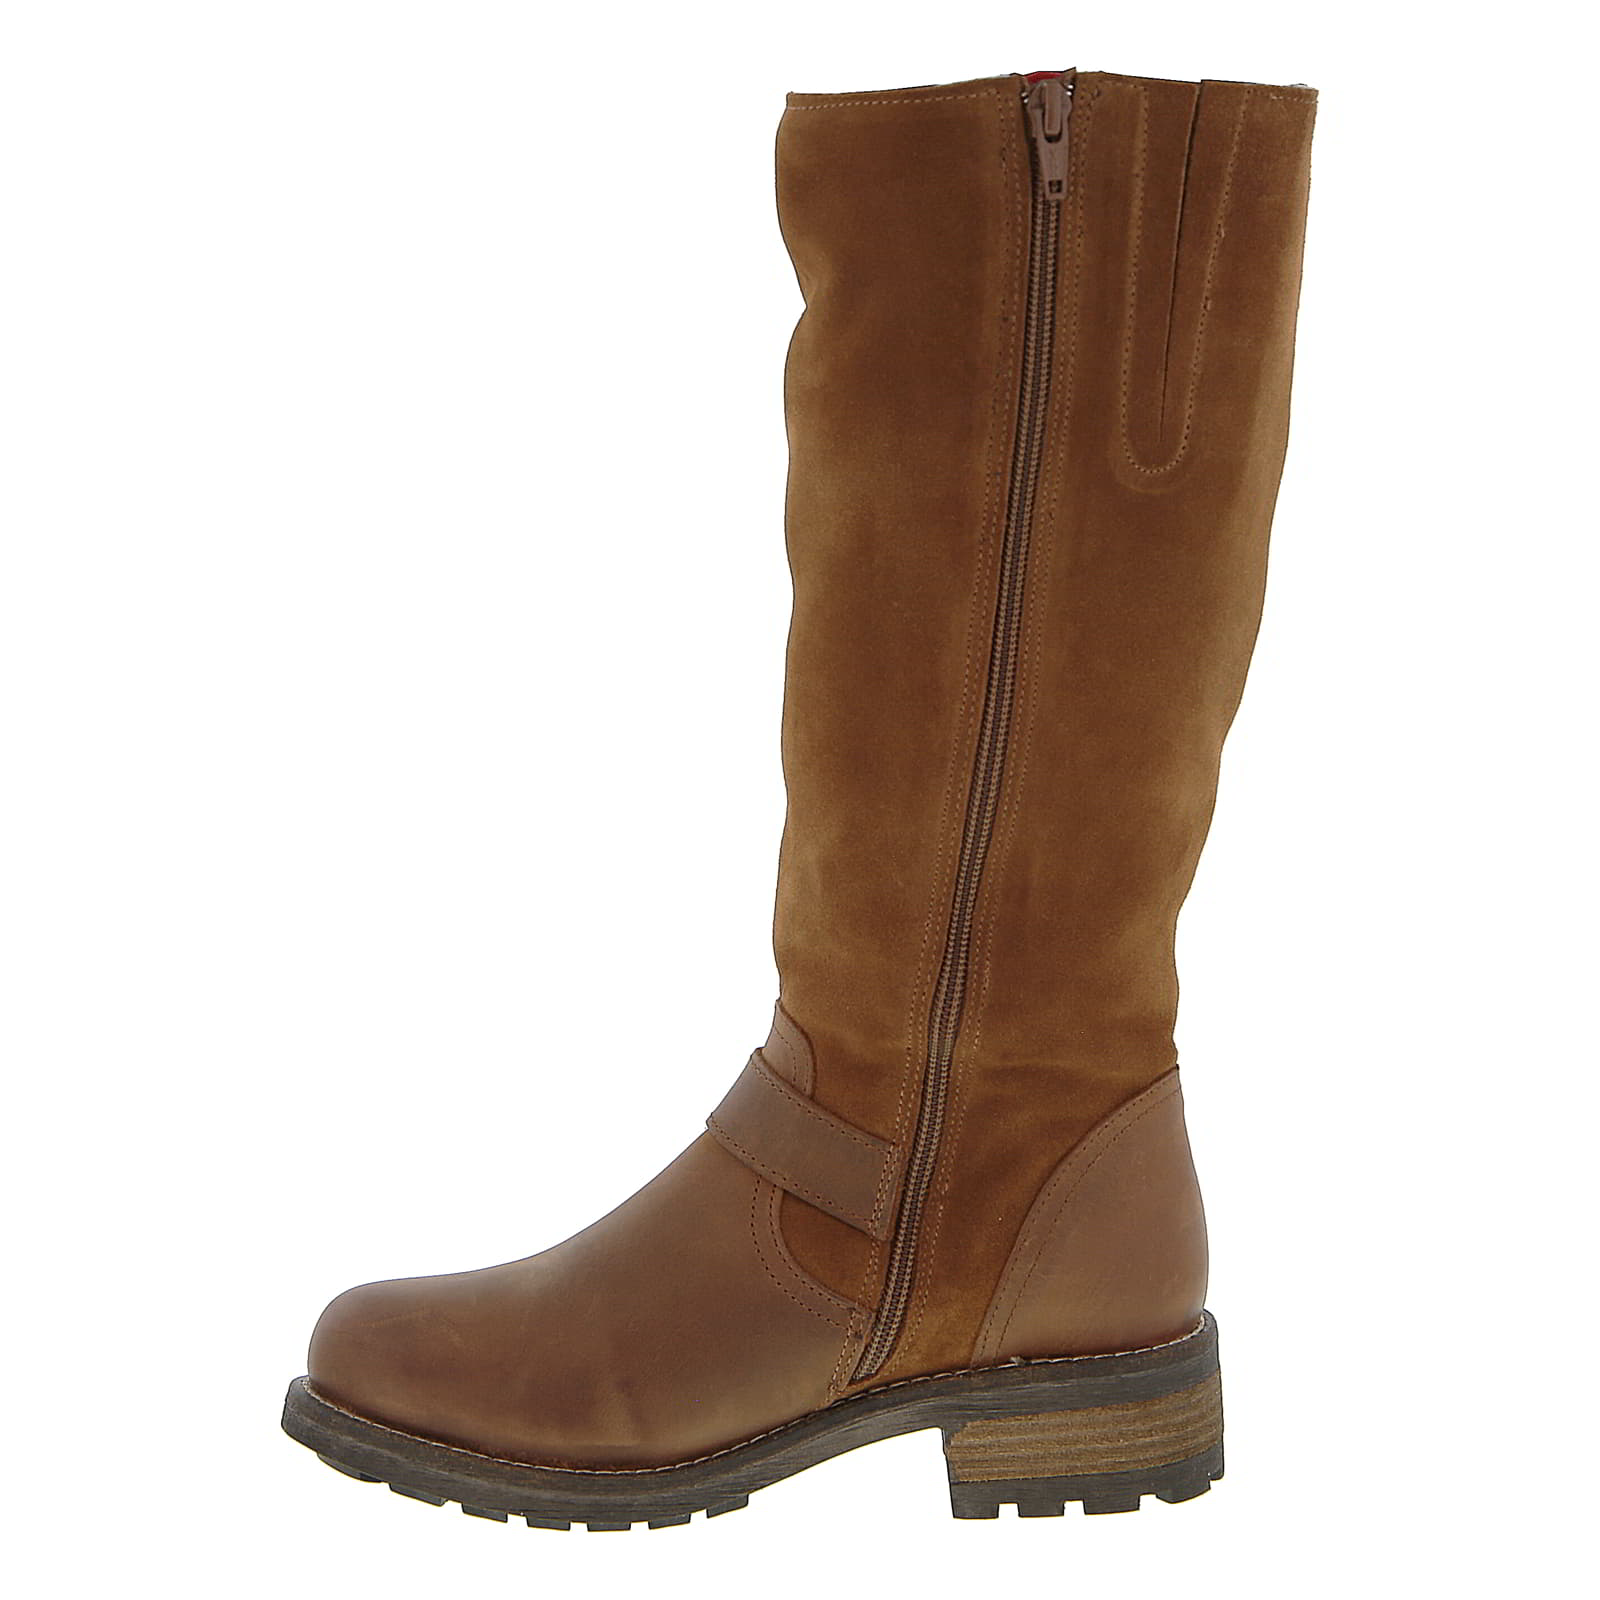 Womens Bridge Fur Lined Tall Country Boots - Cognac